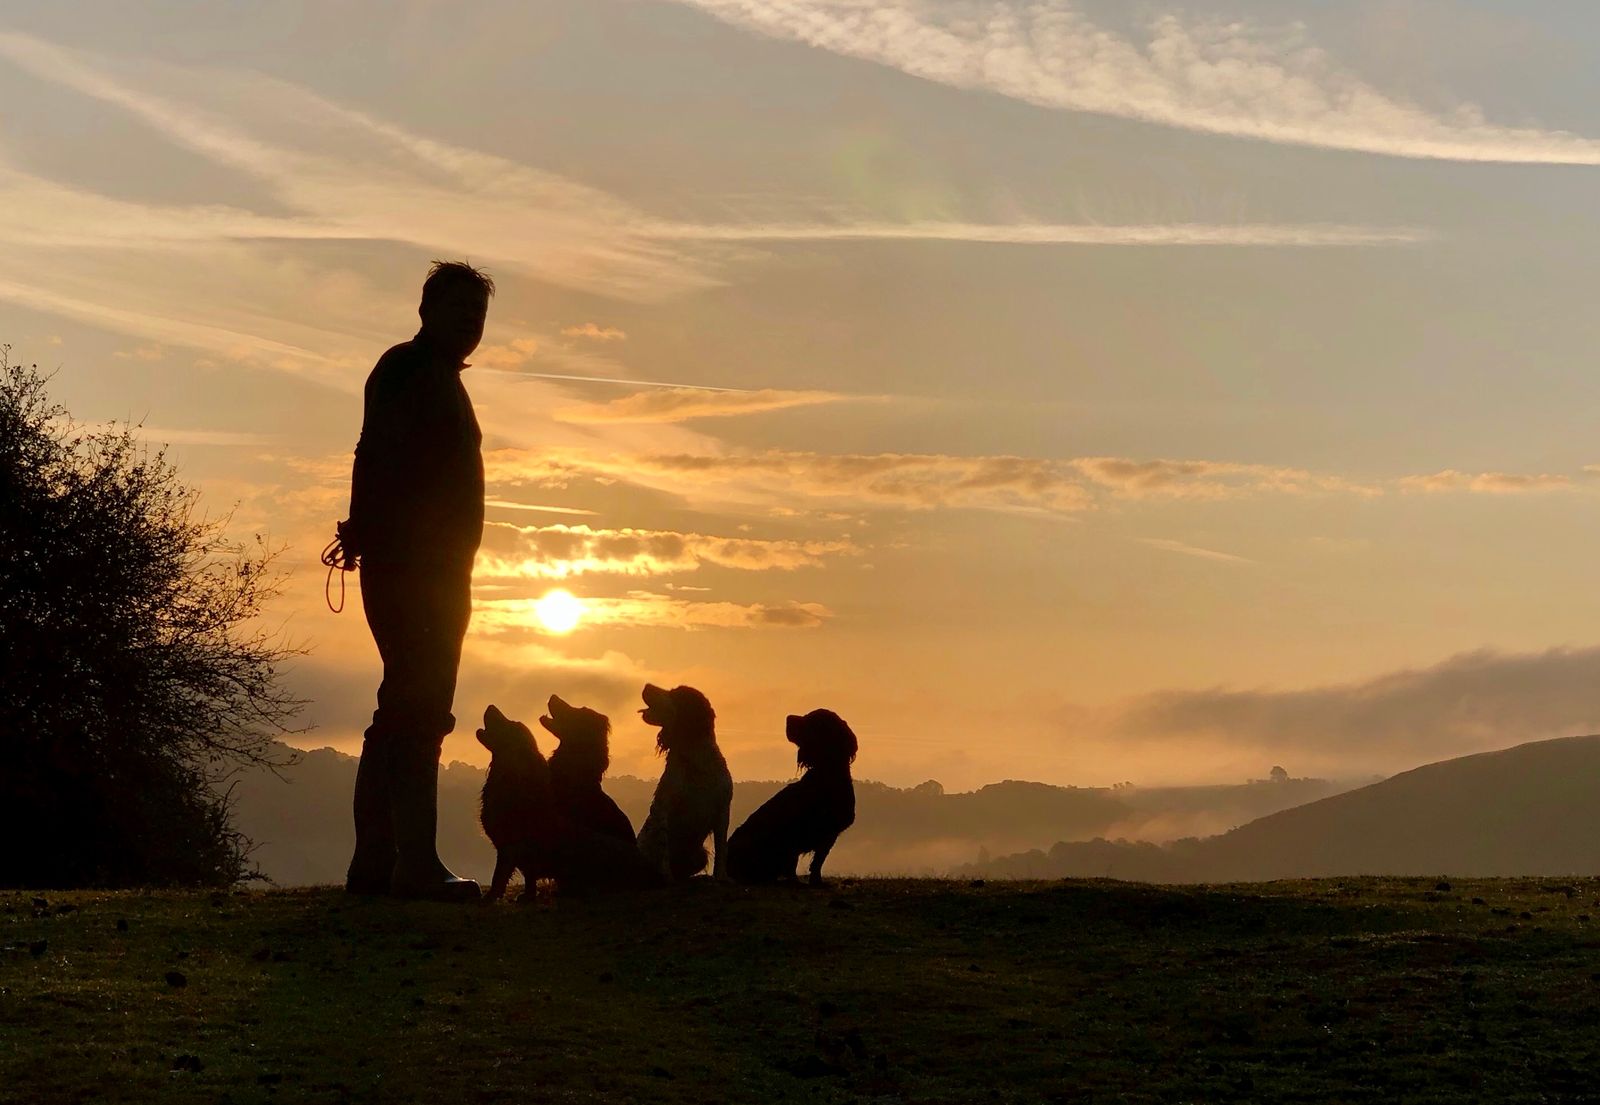 One Man And His Dogs